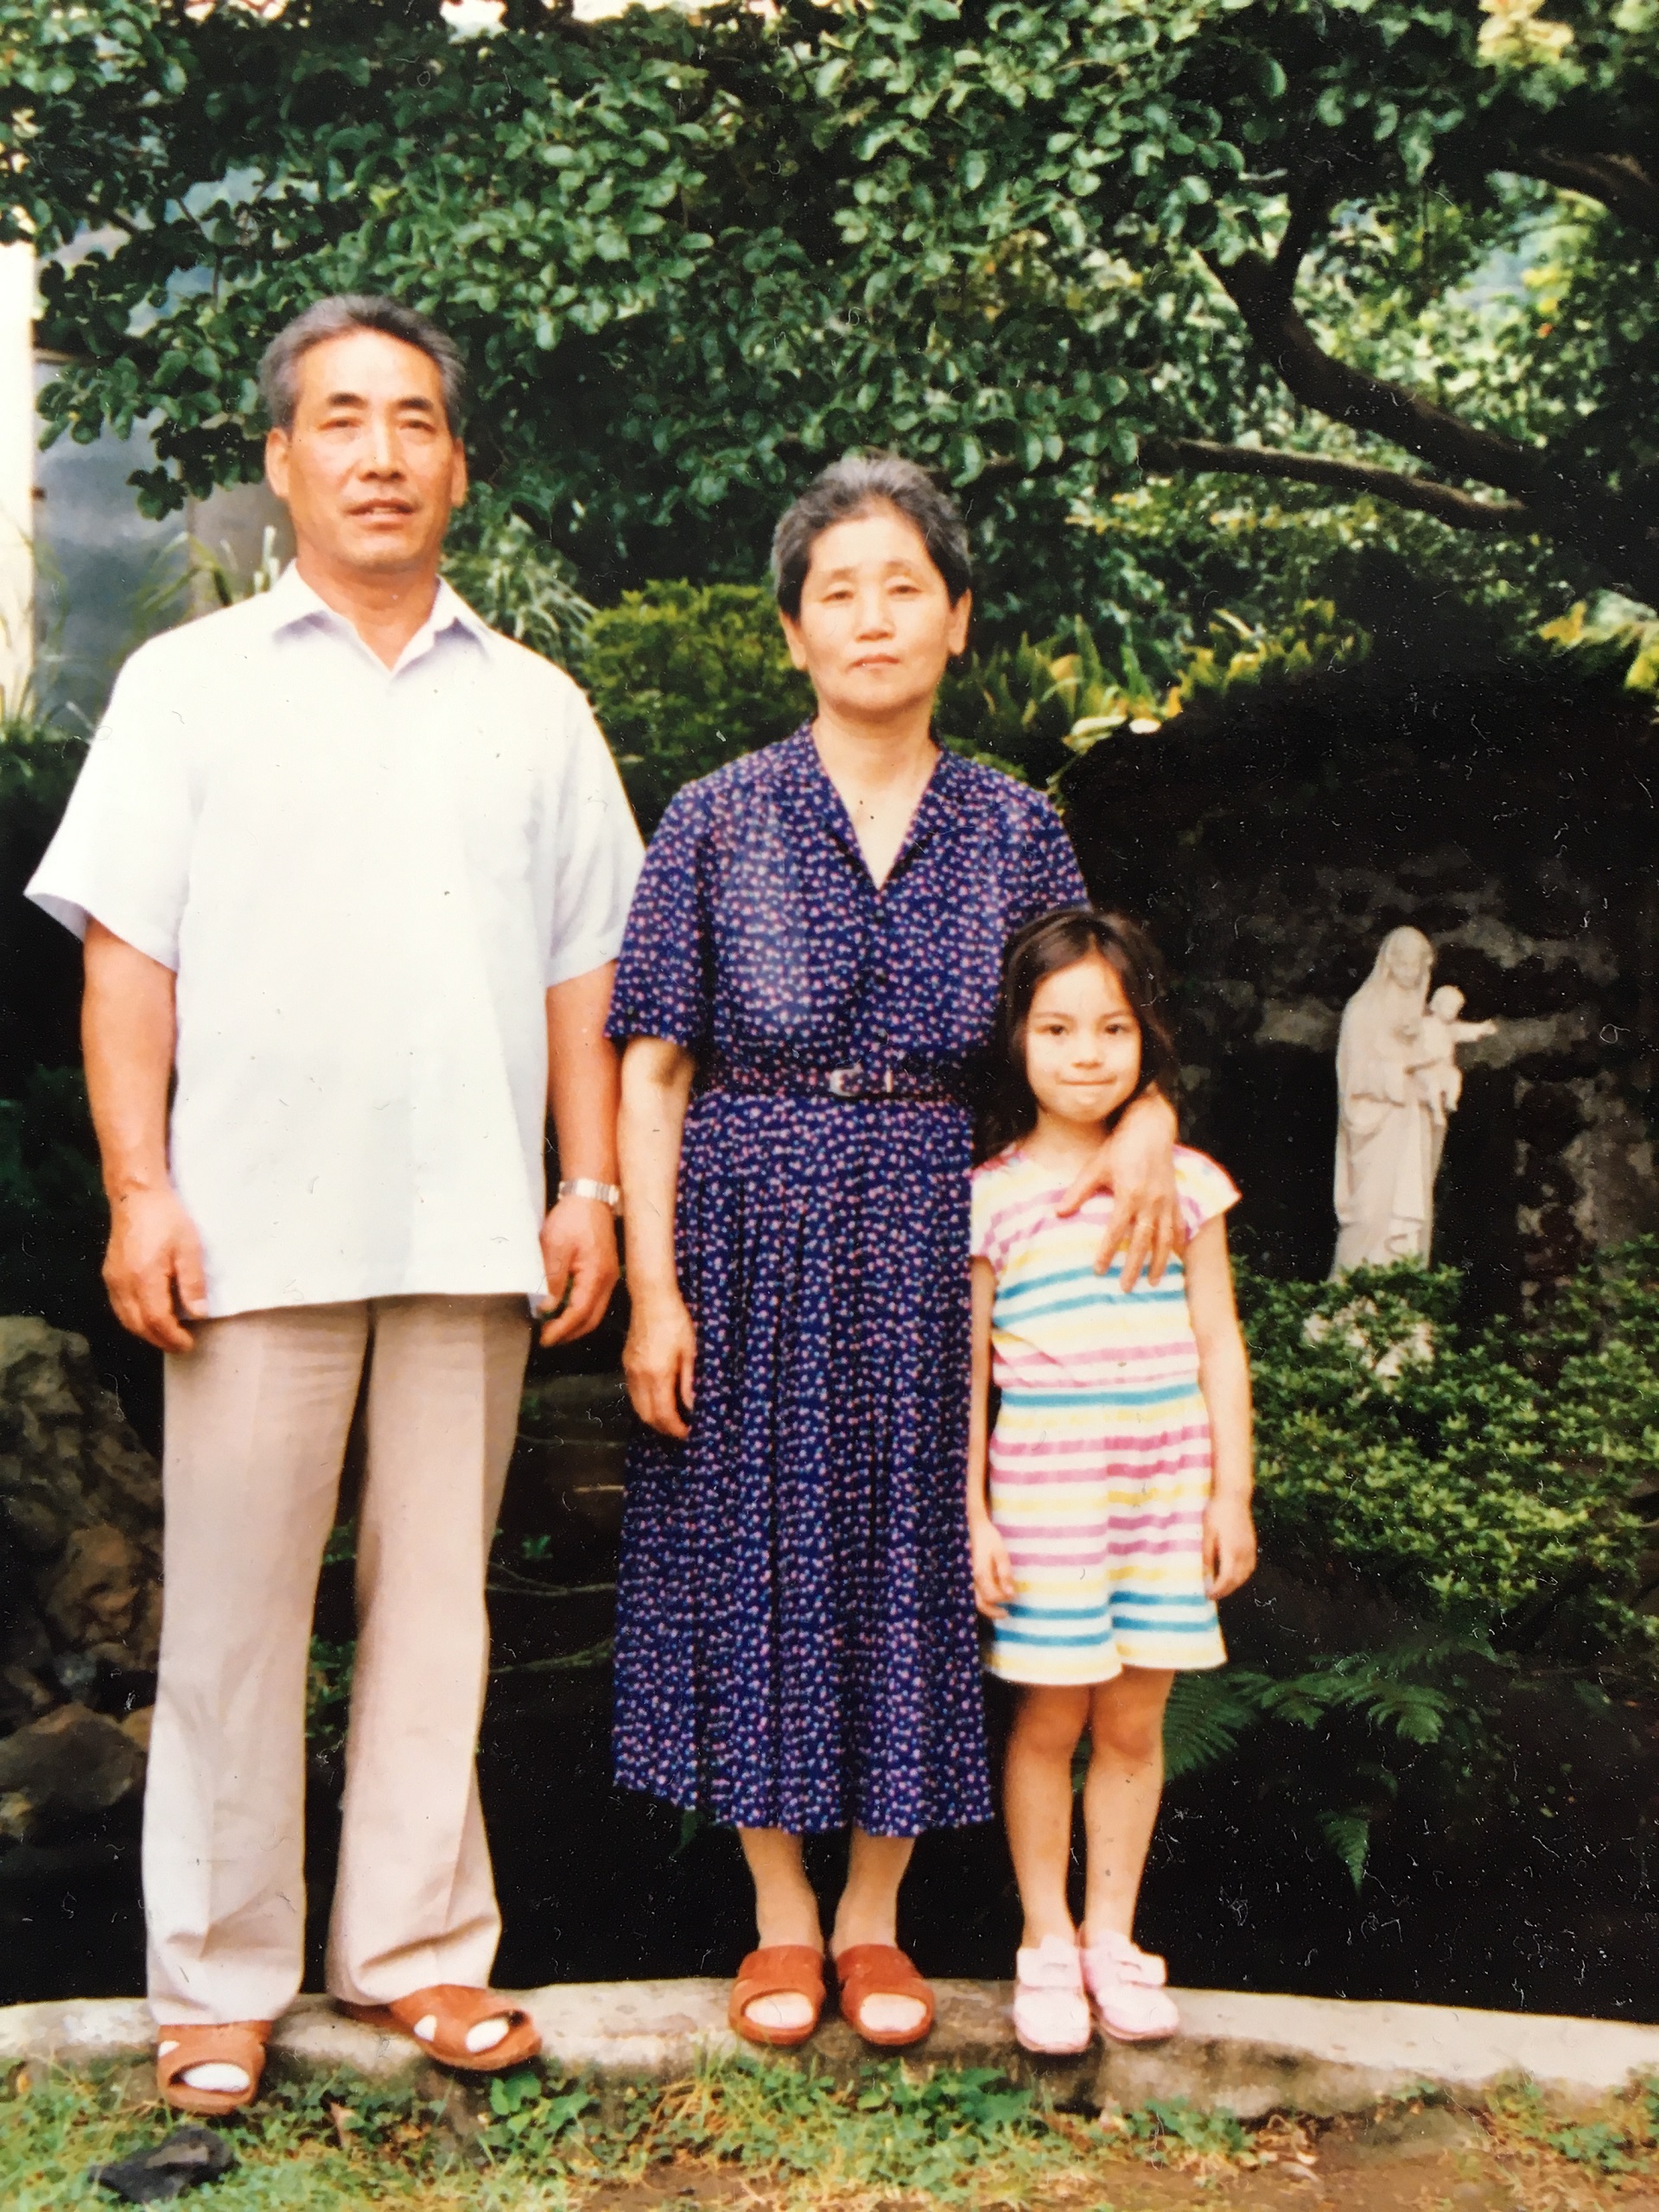 Two grandparents stand with their young granddaughter amid green trees and a pond of water. A ceramic statue of a saint is also in the background. The photo is old and has a classic patina to it.